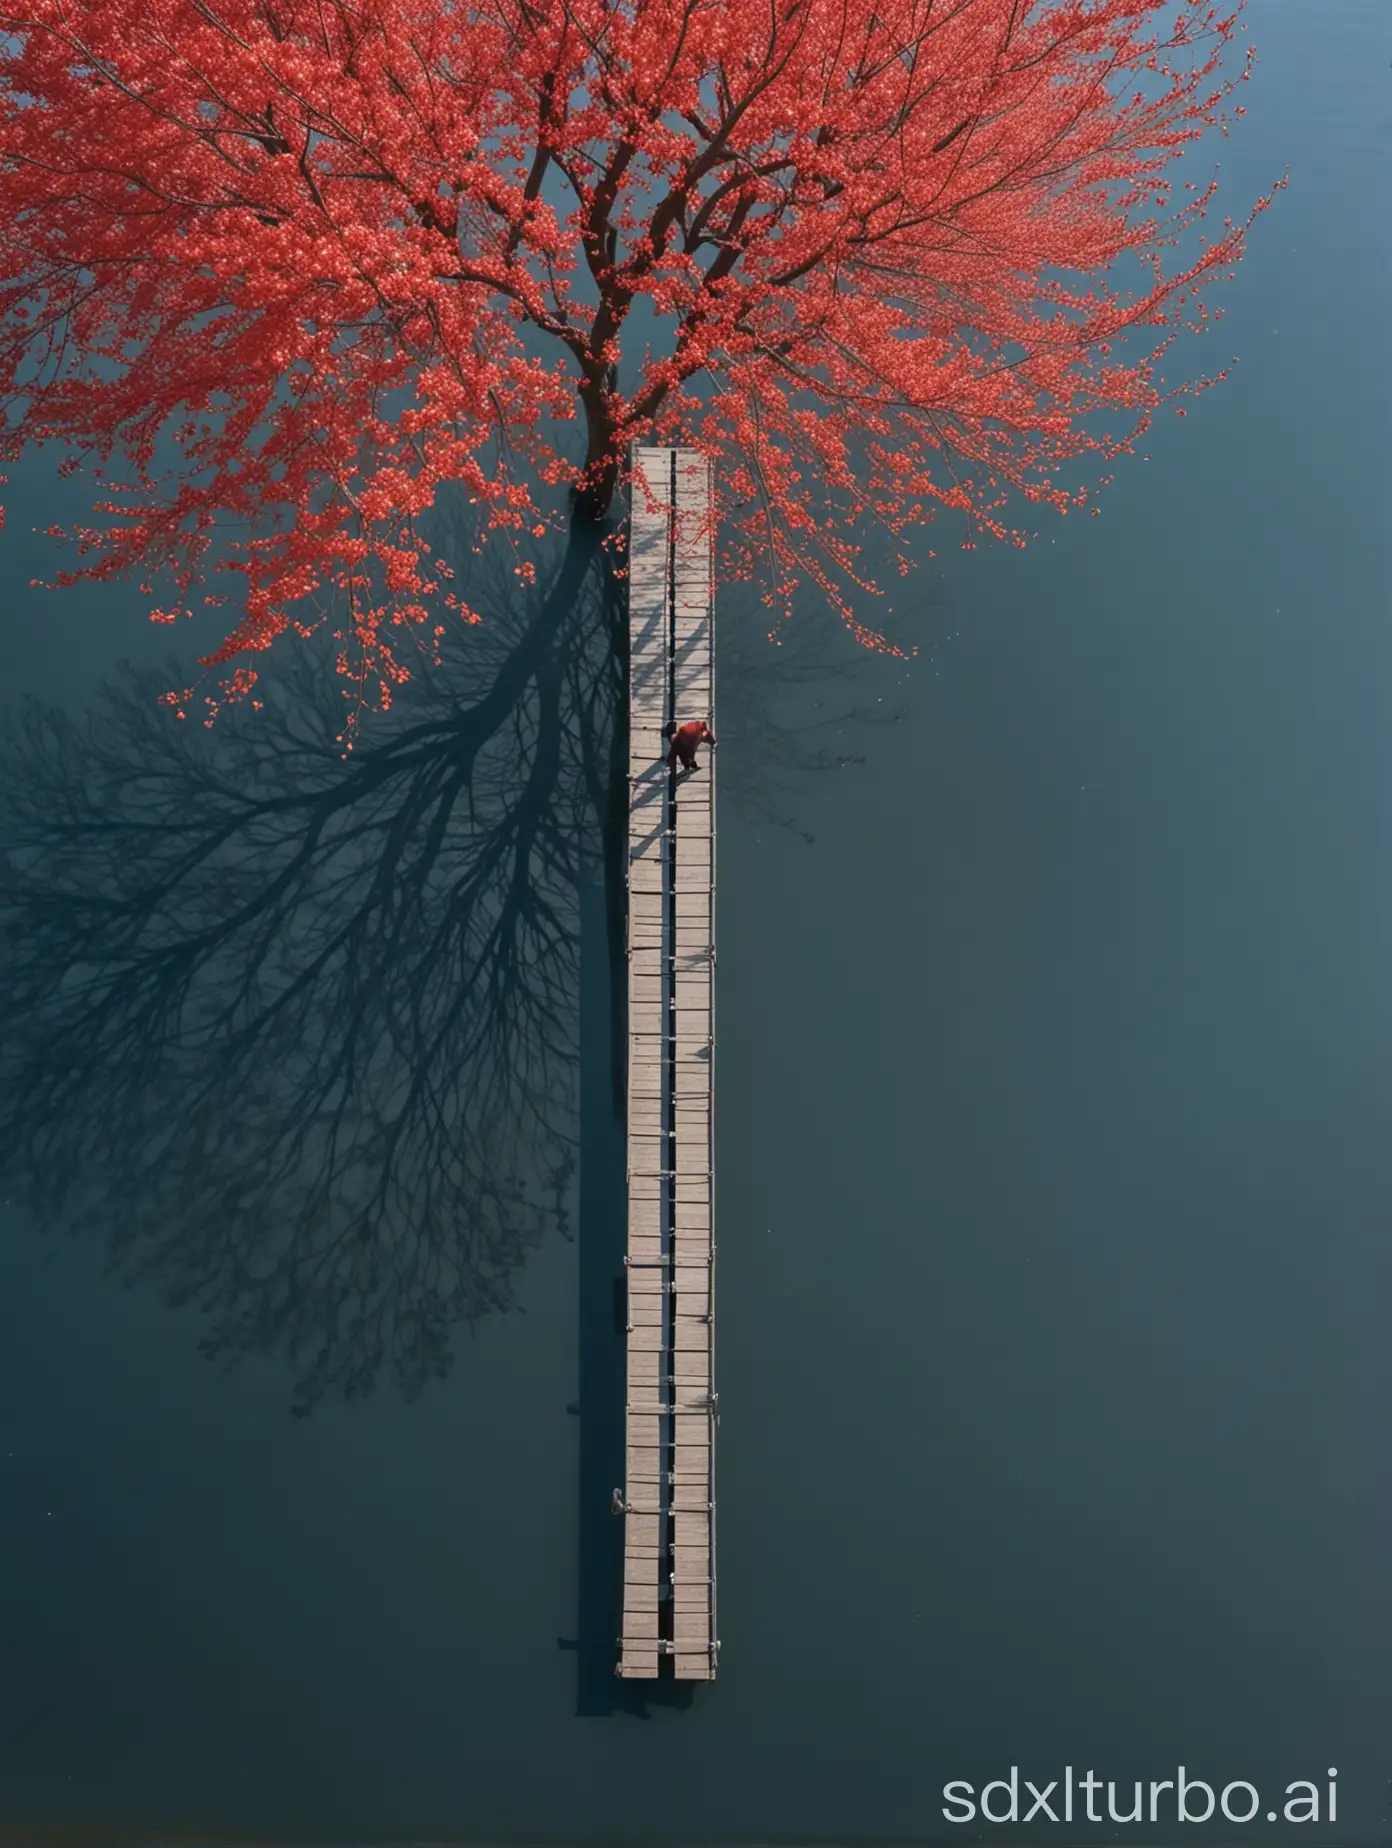 minimalism, Documentary photography, high angle view, golden ratio, reflection of a man walking on an arc wooden bridge above an ice-free lake, reflection of one Blossoming vermilion-red Plum tree alone by the ice-free lake, snowkissed landscape, still and chilly vibe, crystal blue sky, outdoor art, minimalist detail, by Harry Callahan